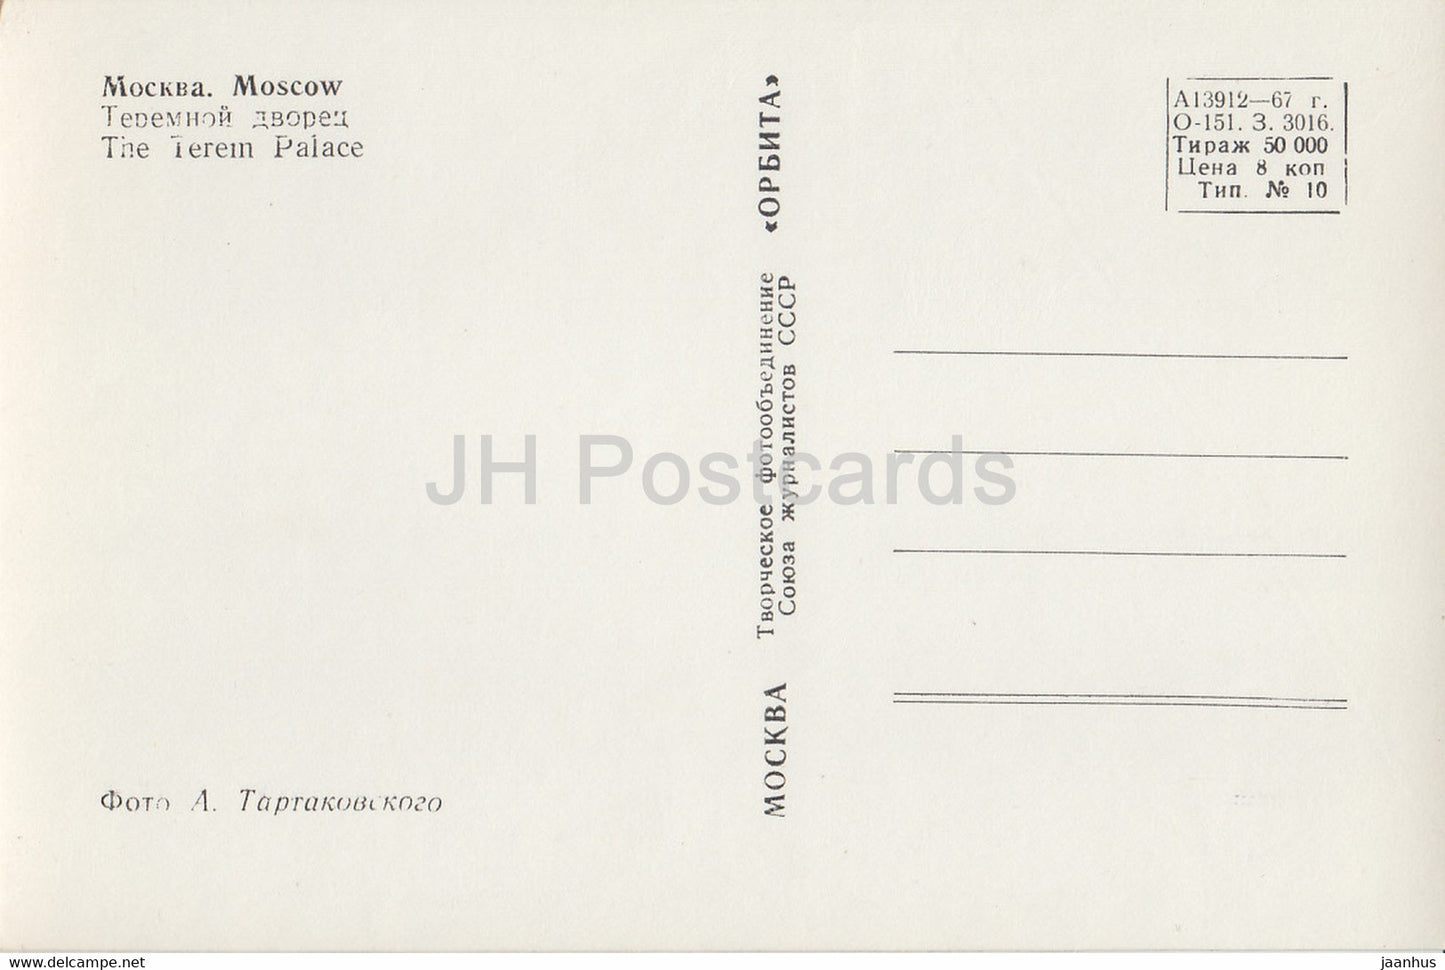 Moscow - The Terem Palace - 1967 - Russia USSR - unused